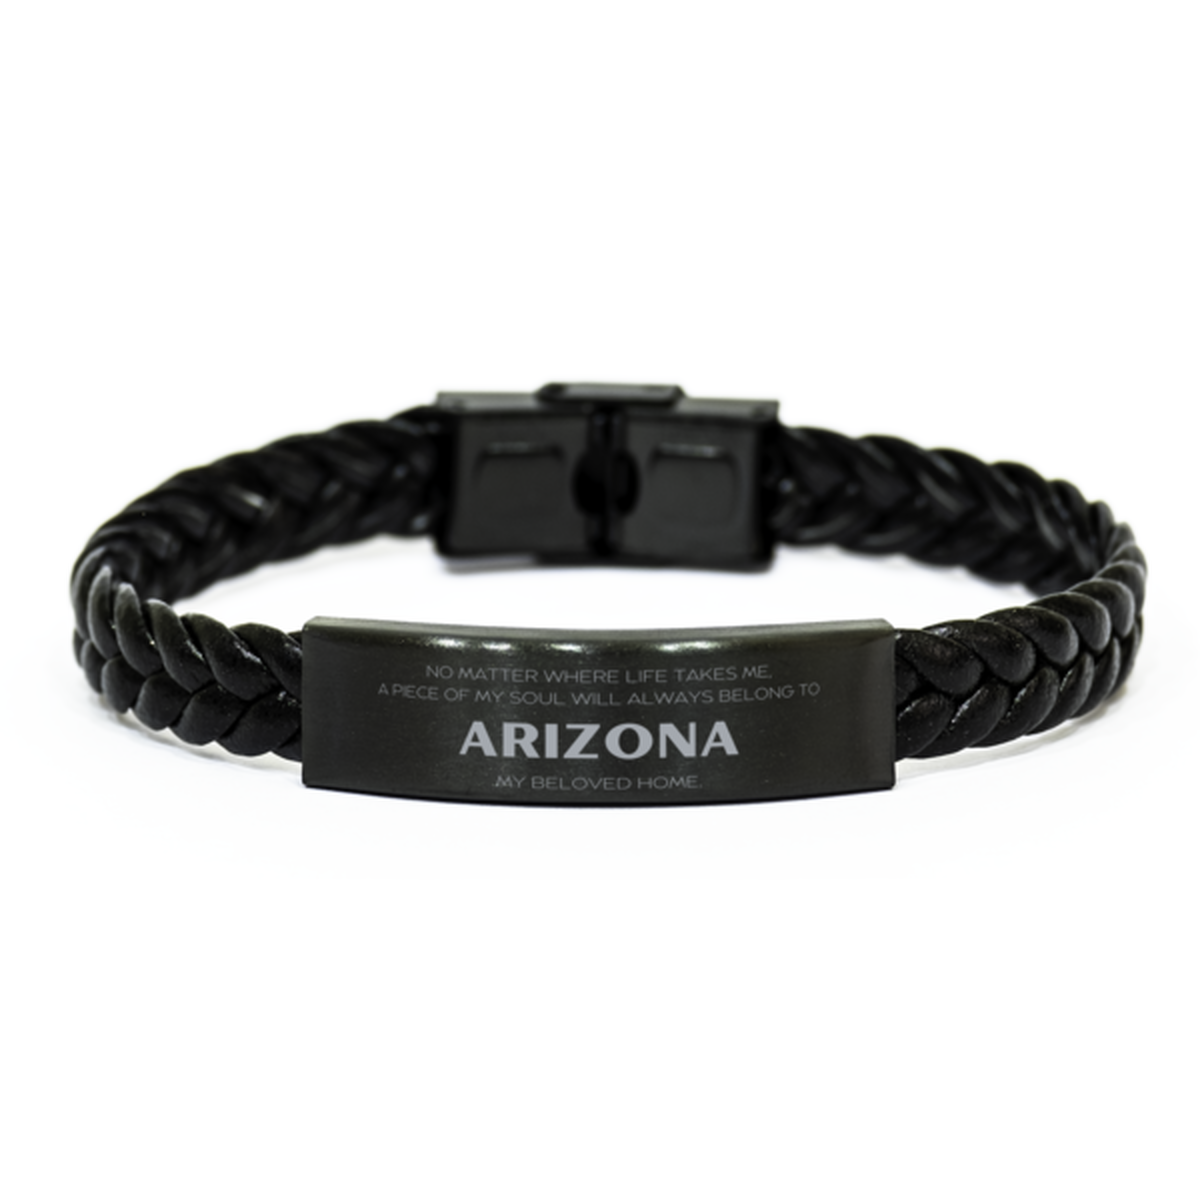 Love Arizona State Gifts, My soul will always belong to Arizona, Proud Braided Leather Bracelet, Birthday Unique Gifts For Arizona Men, Women, Friends